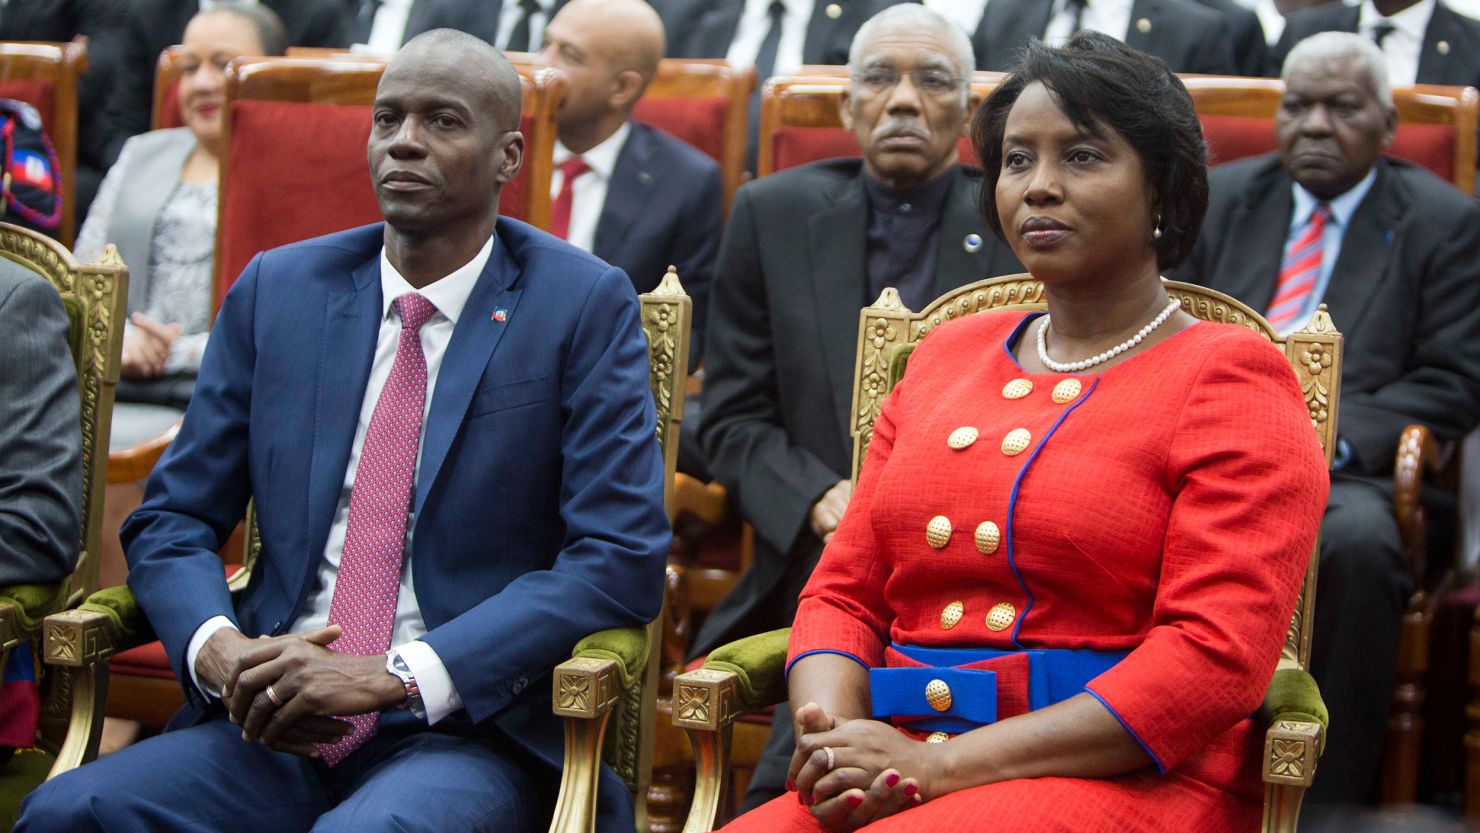 Haiti's former President Jovenel Moïse sits with his wife Martine during his swearing-in ceremony at Parliament in Port-au-Prince in February 2017.